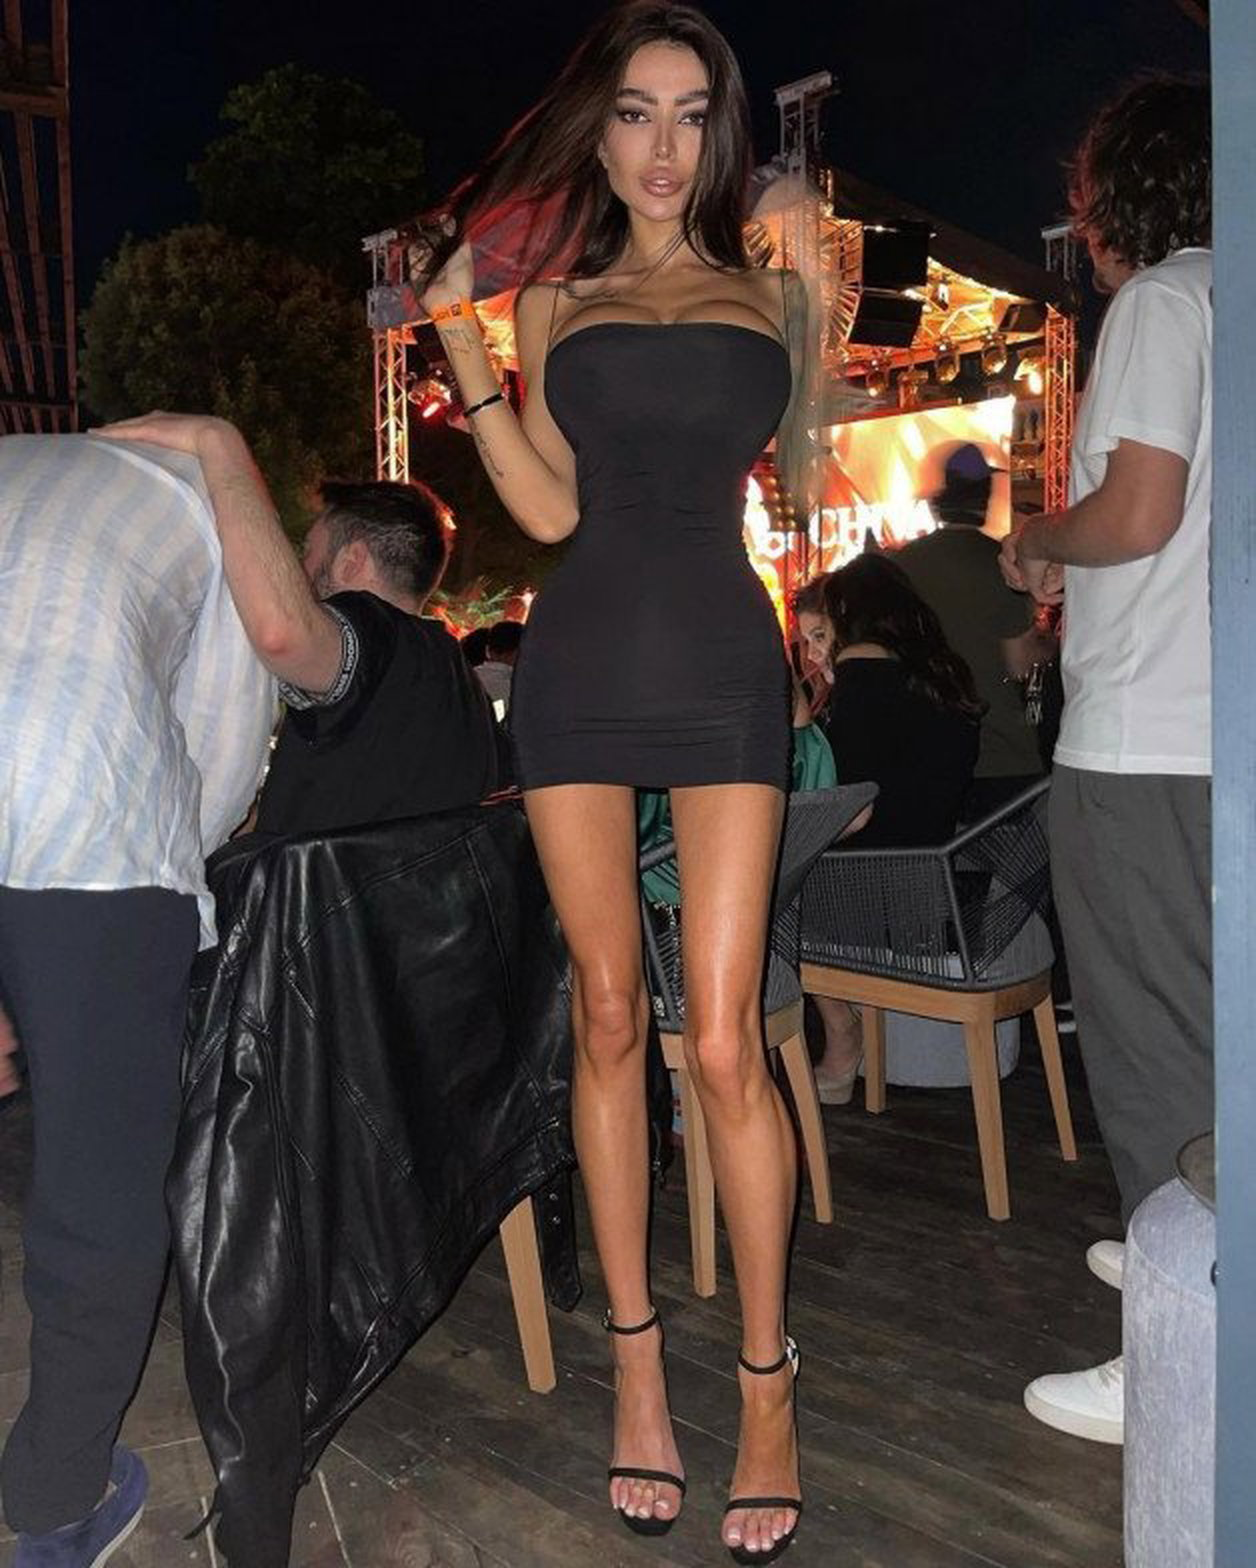 Watch the Photo by Devynsdogg with the username @Devynsdogg, posted on June 1, 2021. The post is about the topic Breast Impants - Plastic Positive. and the text says 'Perfect little black dress! #alenaomovych #ukrainianmodels #tattoo #fetish #girlswithhighheels #babes #sexyfemales #giwtf #breastimpantsplasticpositive #faketits #awesomeboobs #hourglassfigures #bimbo #fetish'